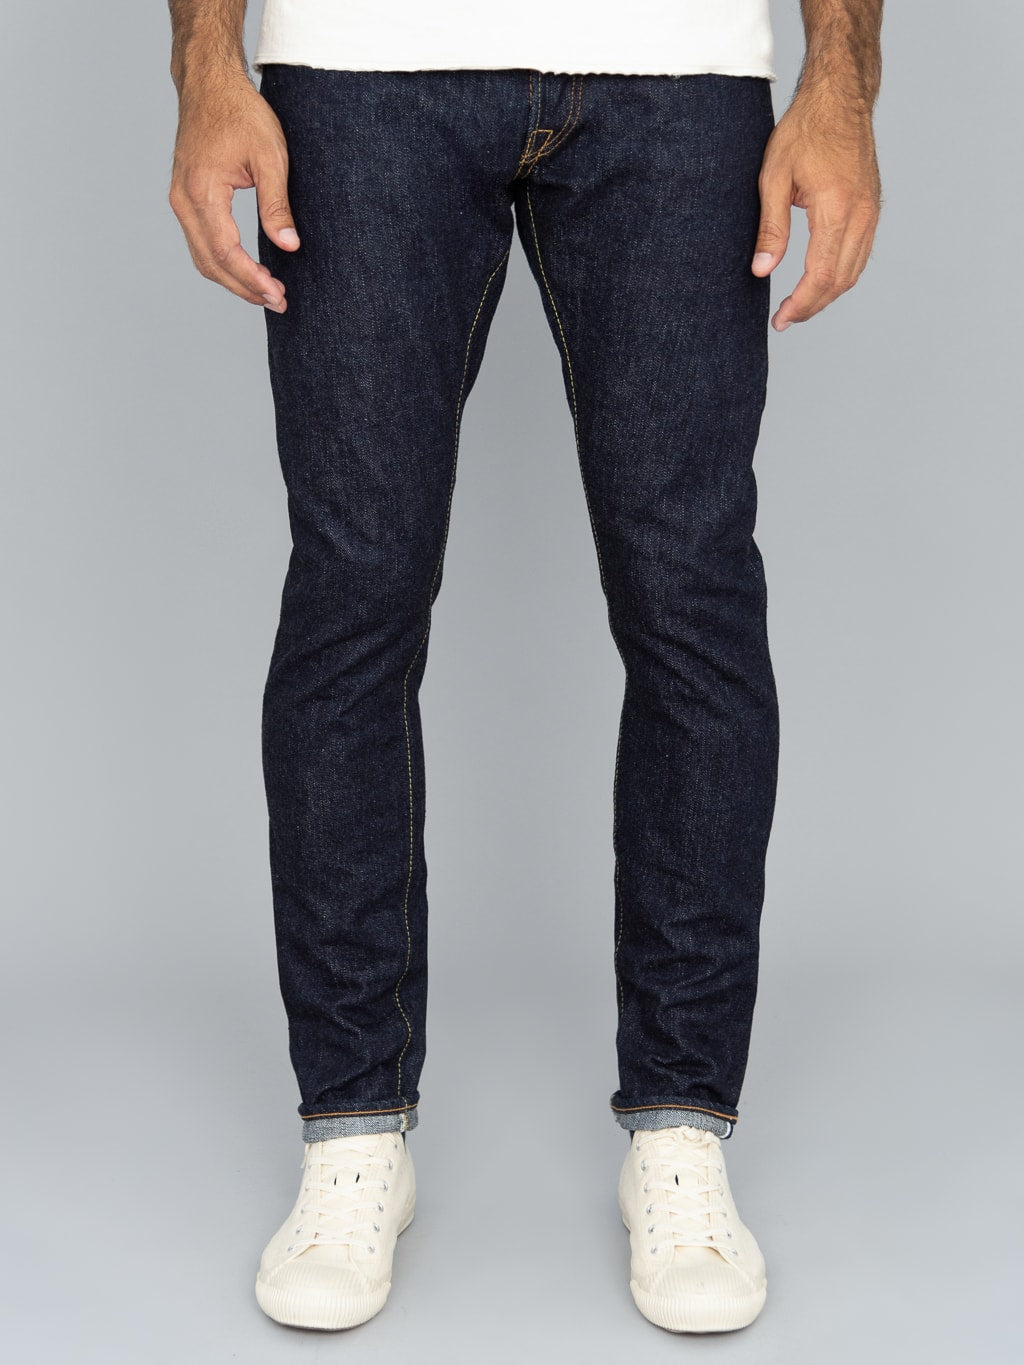 Pure Blue Japan Relaxed Tapered denim jeans front fit